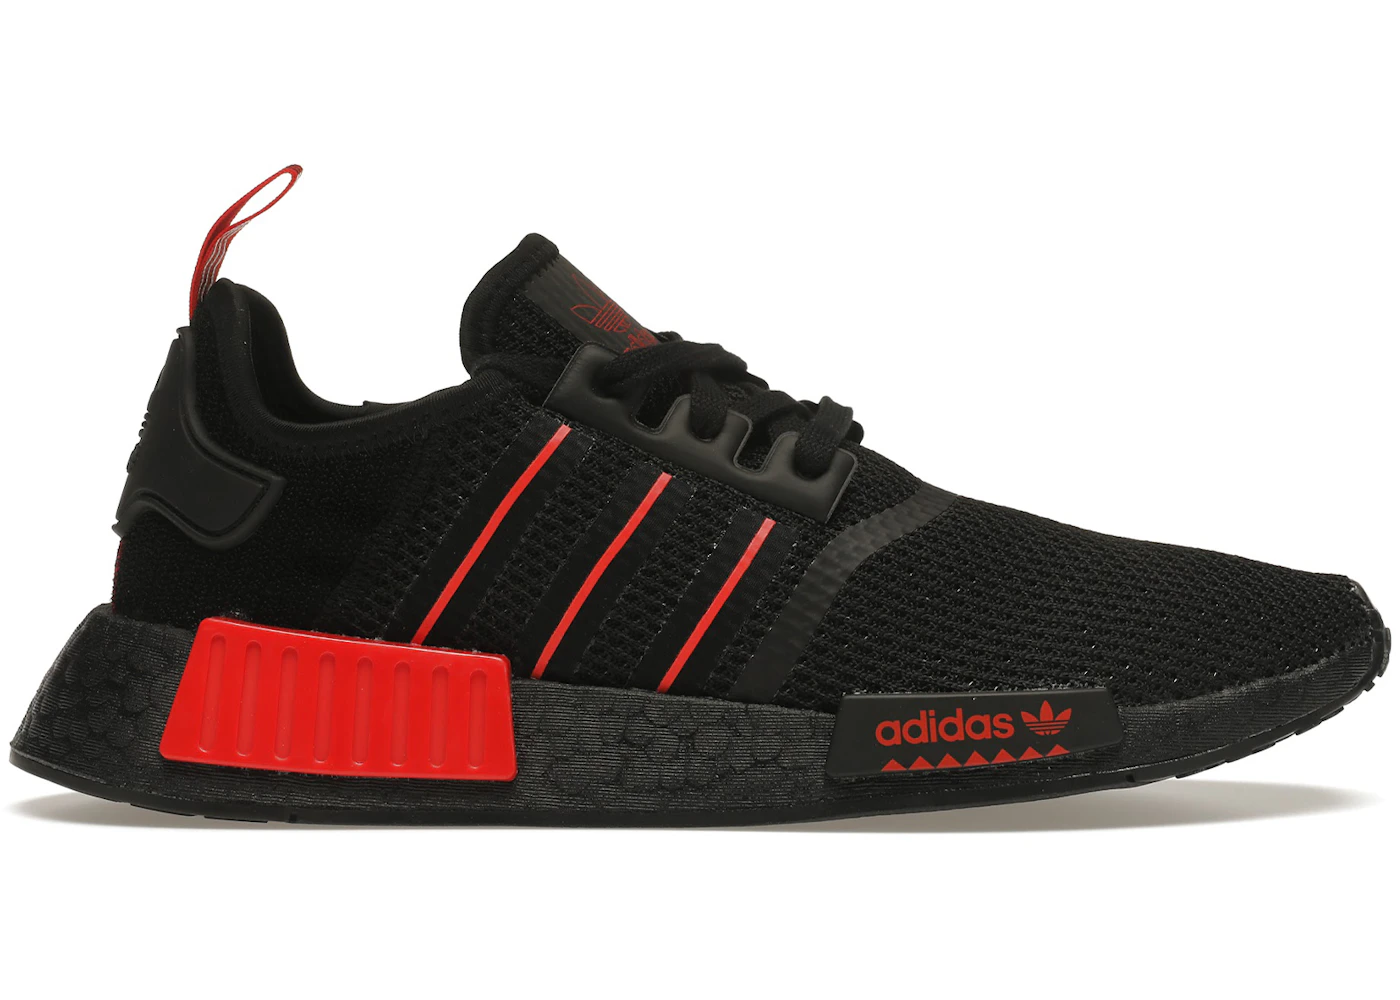 Dader Resistent bestrating adidas NMD R1 Core Black Red - GV8422 - US